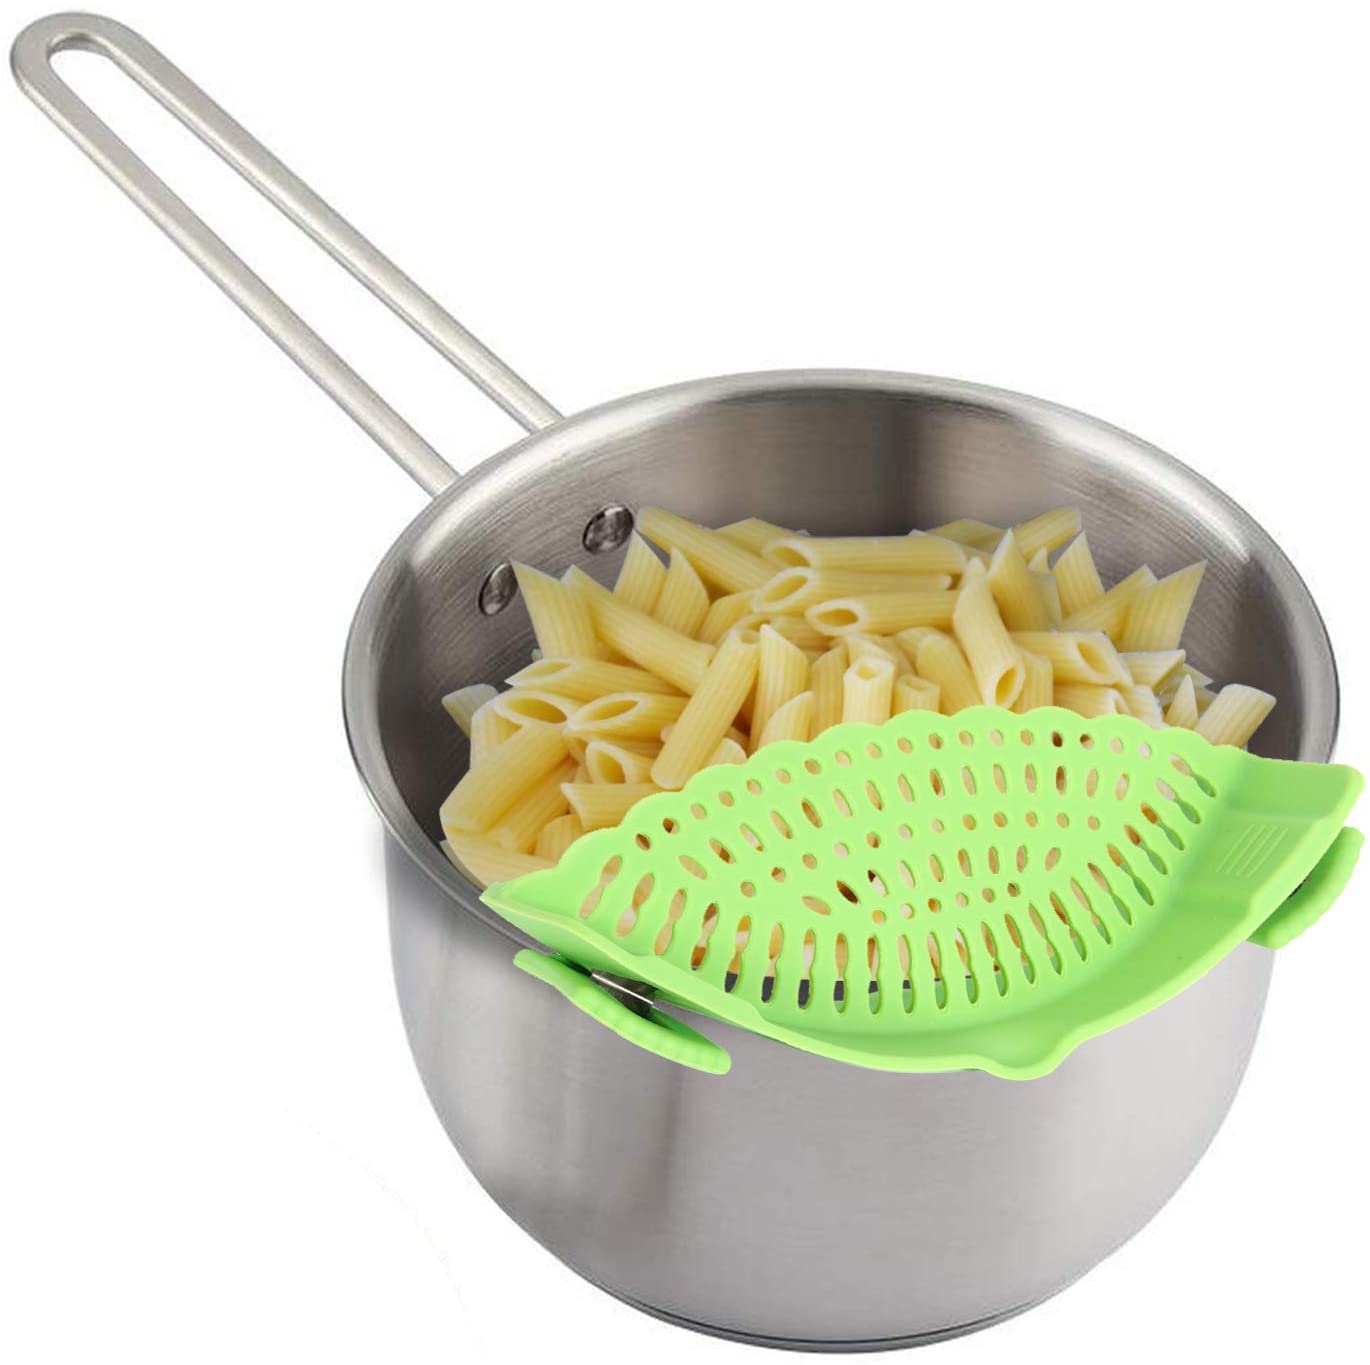 Performore Snap and Strain, Clip on Silicone Colander, Hands-Free Heat Resistant Food Strainer for Pasta Vegetables Noodles Ground Beef, Universal